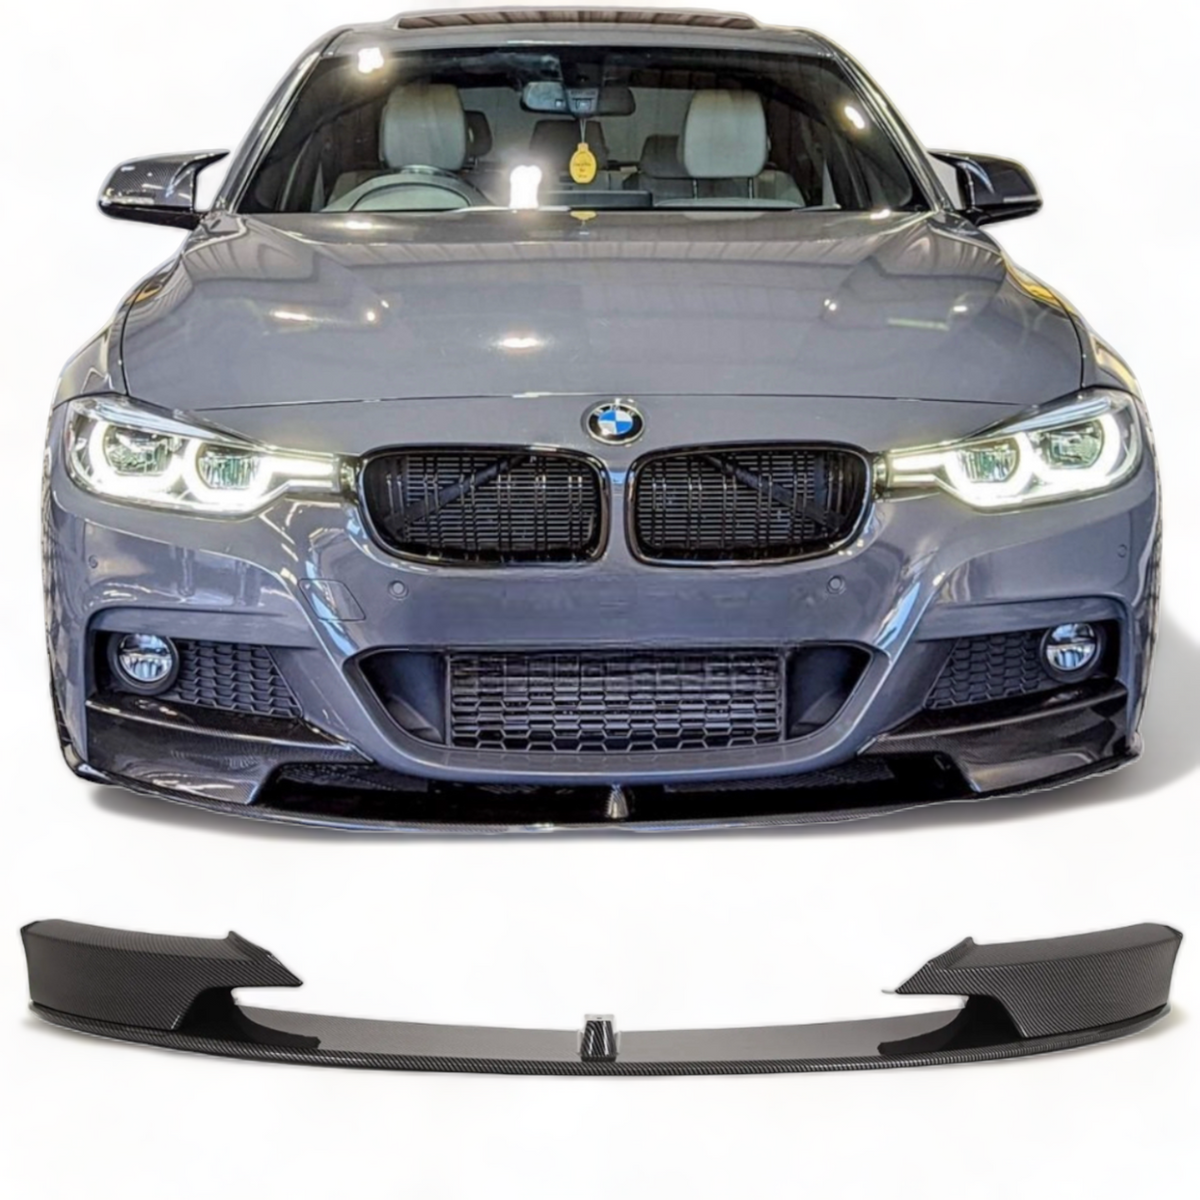 Front Splitter - Fits BMW F30 3 Series - Carbon Look